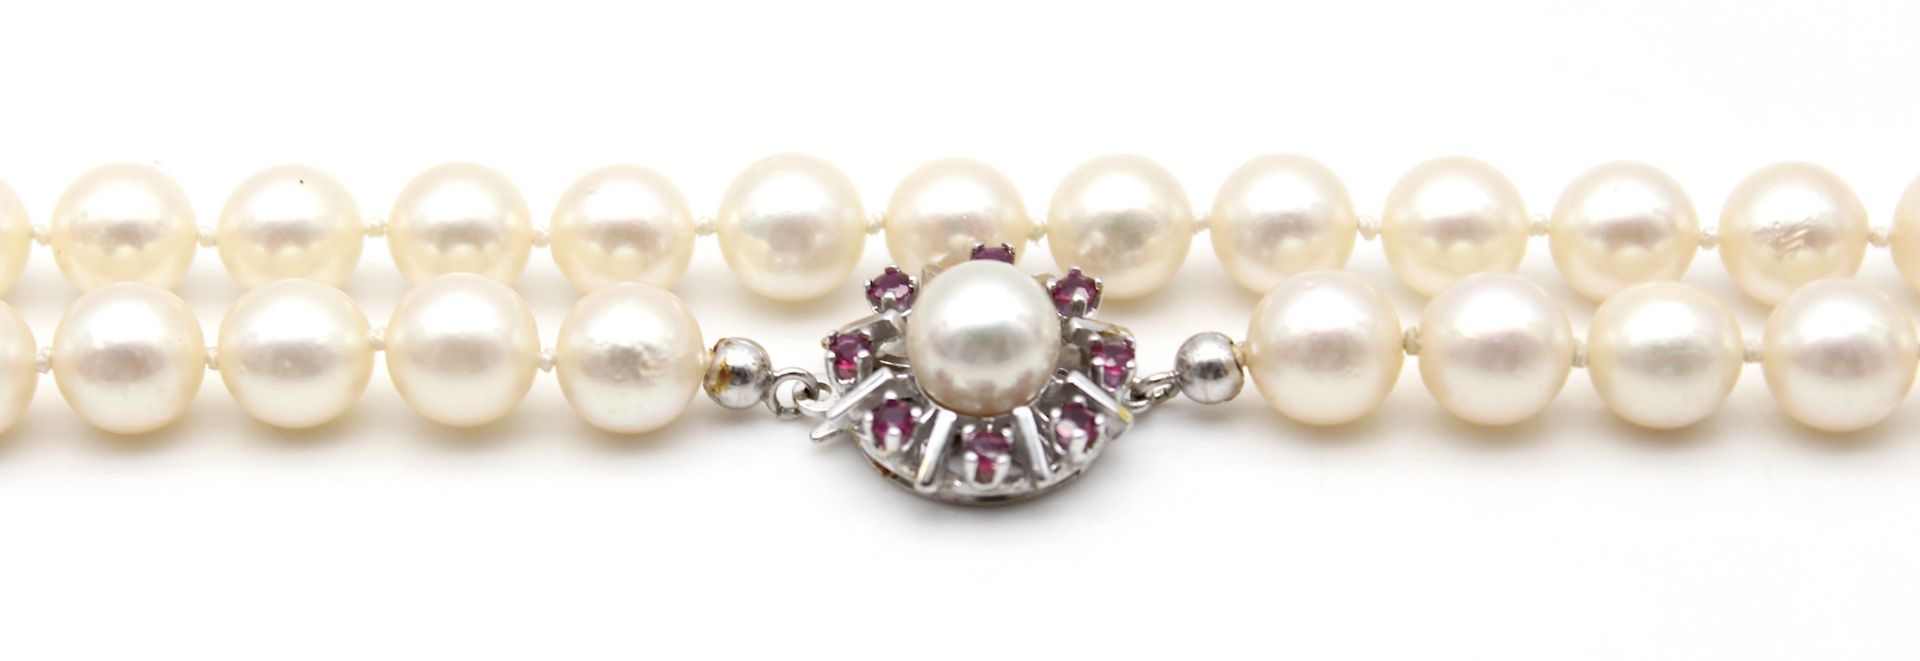 Cultured pearl necklace with rubies - Image 2 of 3